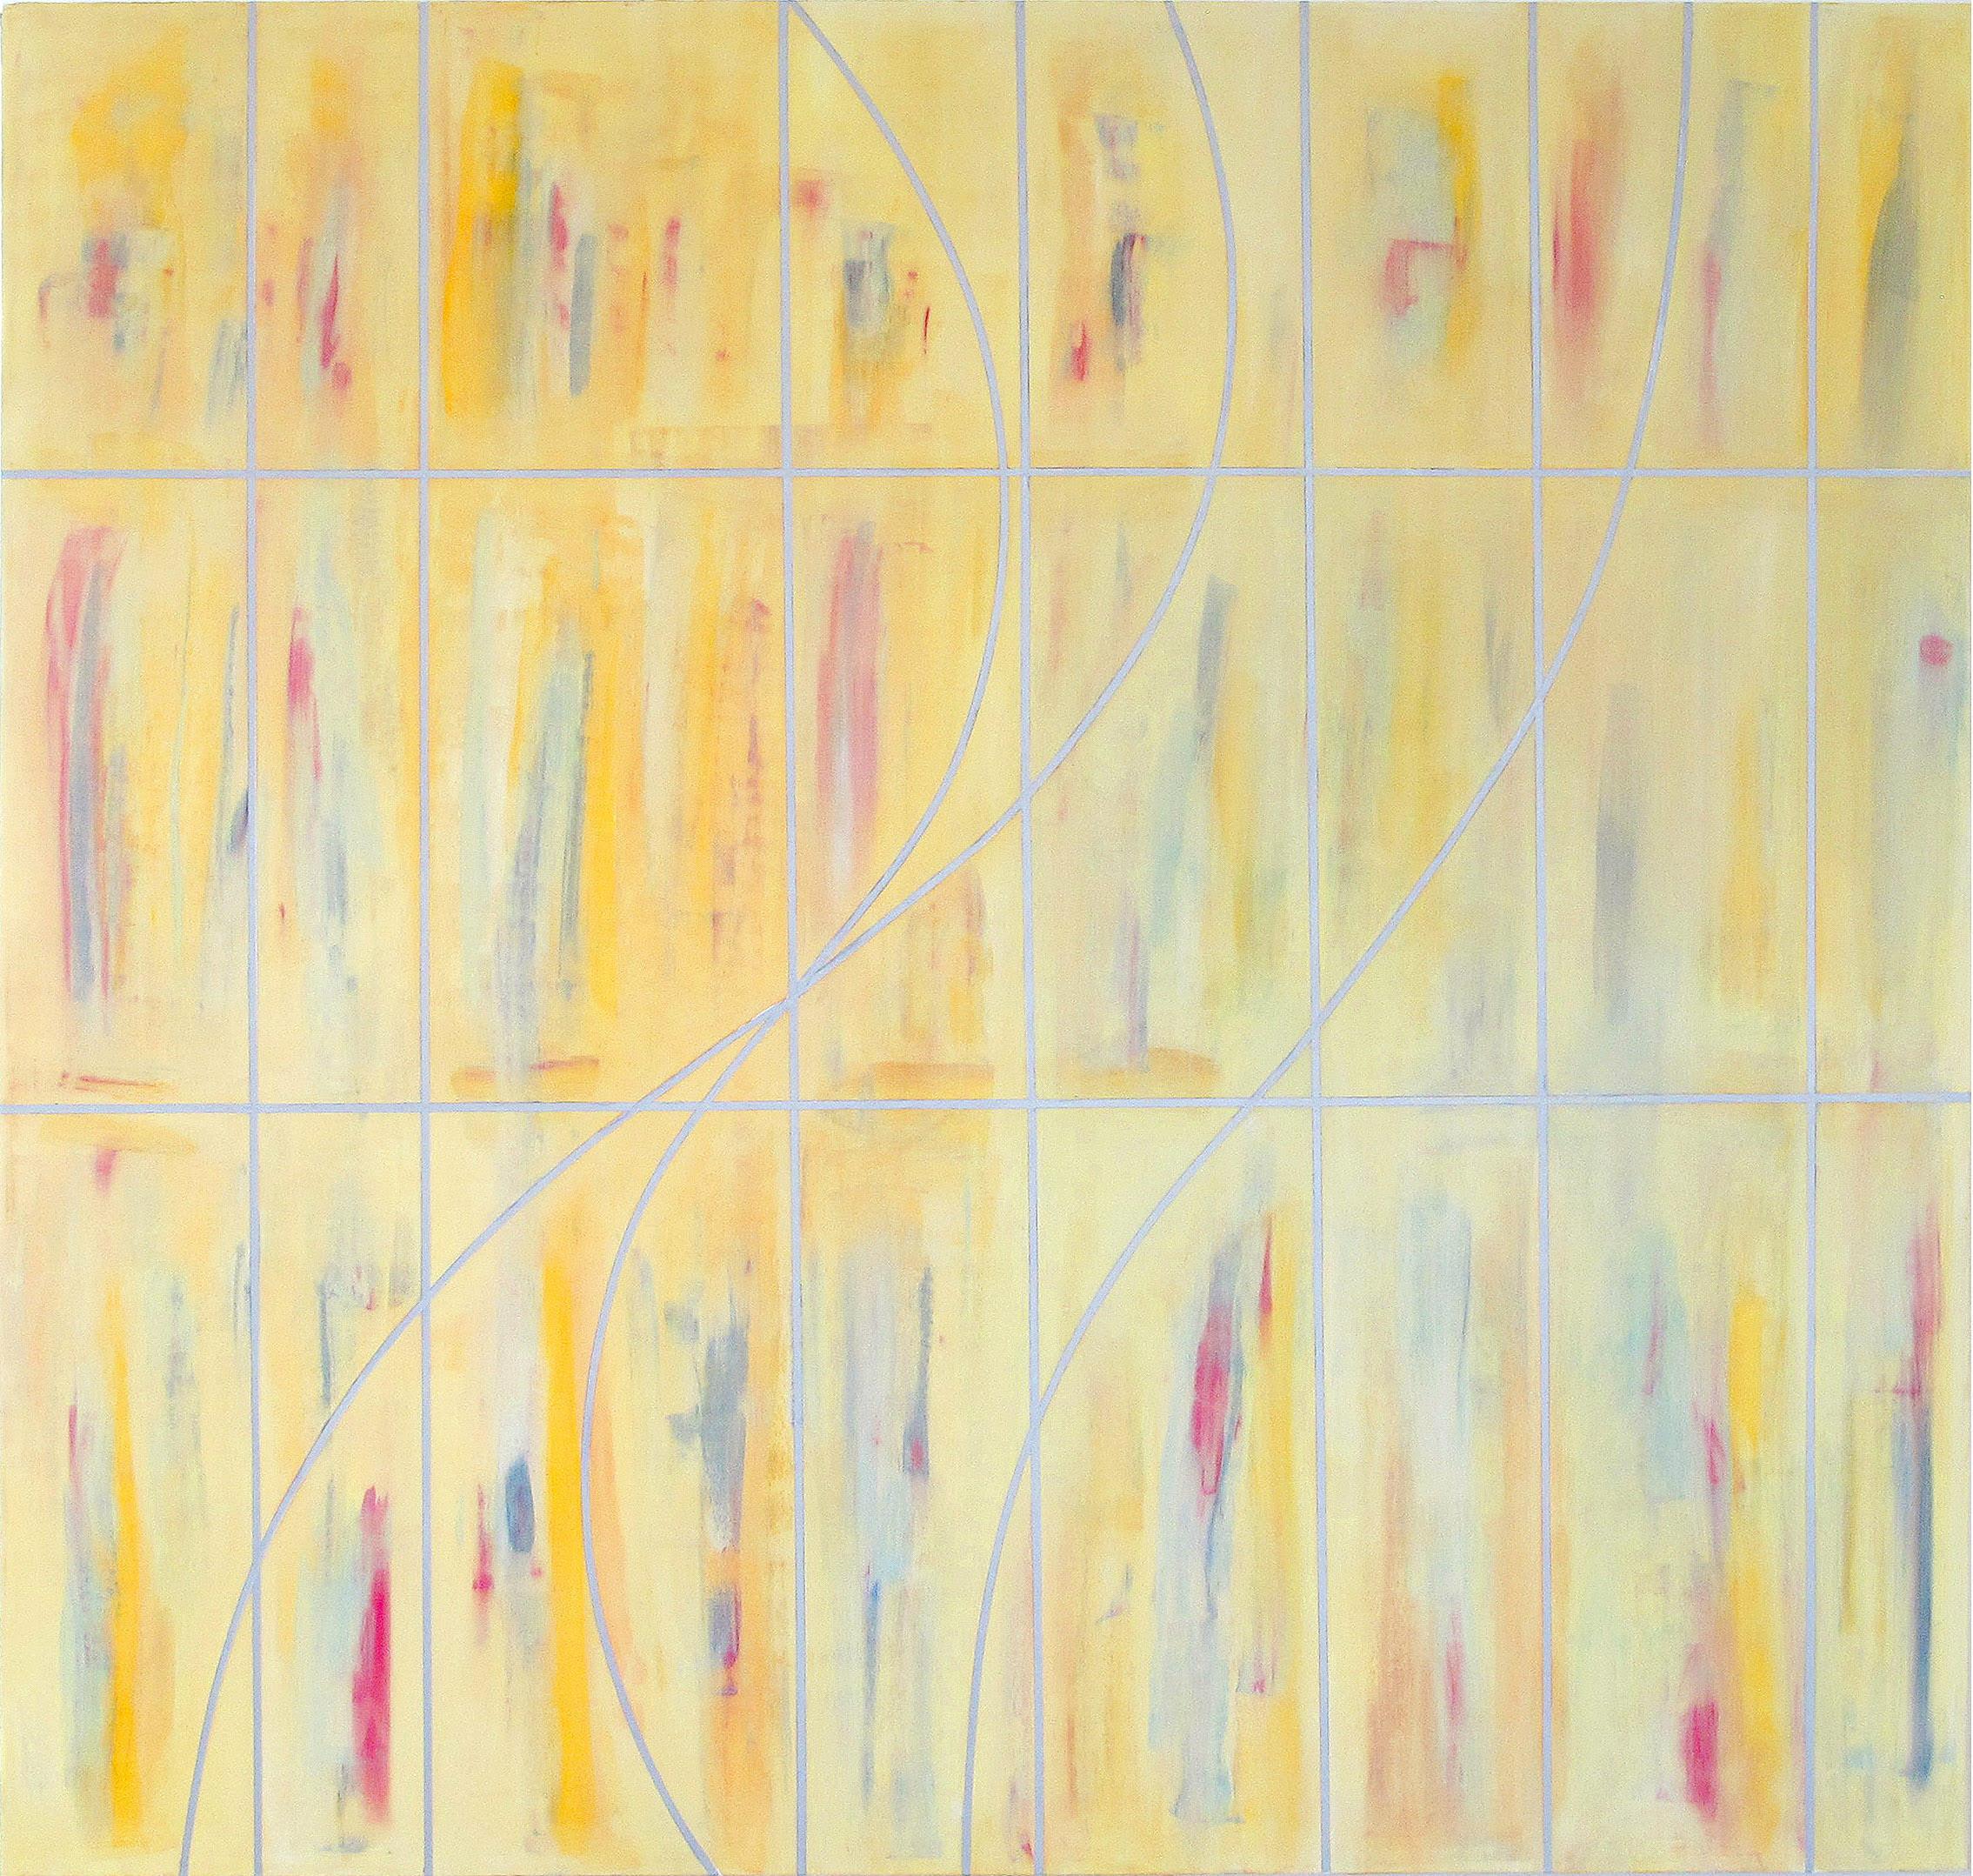 Gudrun Mertes-Frady
DAY_DREAM, 2018
Oil and metallic pigment on linen
60 x 63 in.

This large contemporary abstract oil painting is subtly metallic, and shines in the light.  Delicate silver lines dance across painterly washes of yellow and red.   